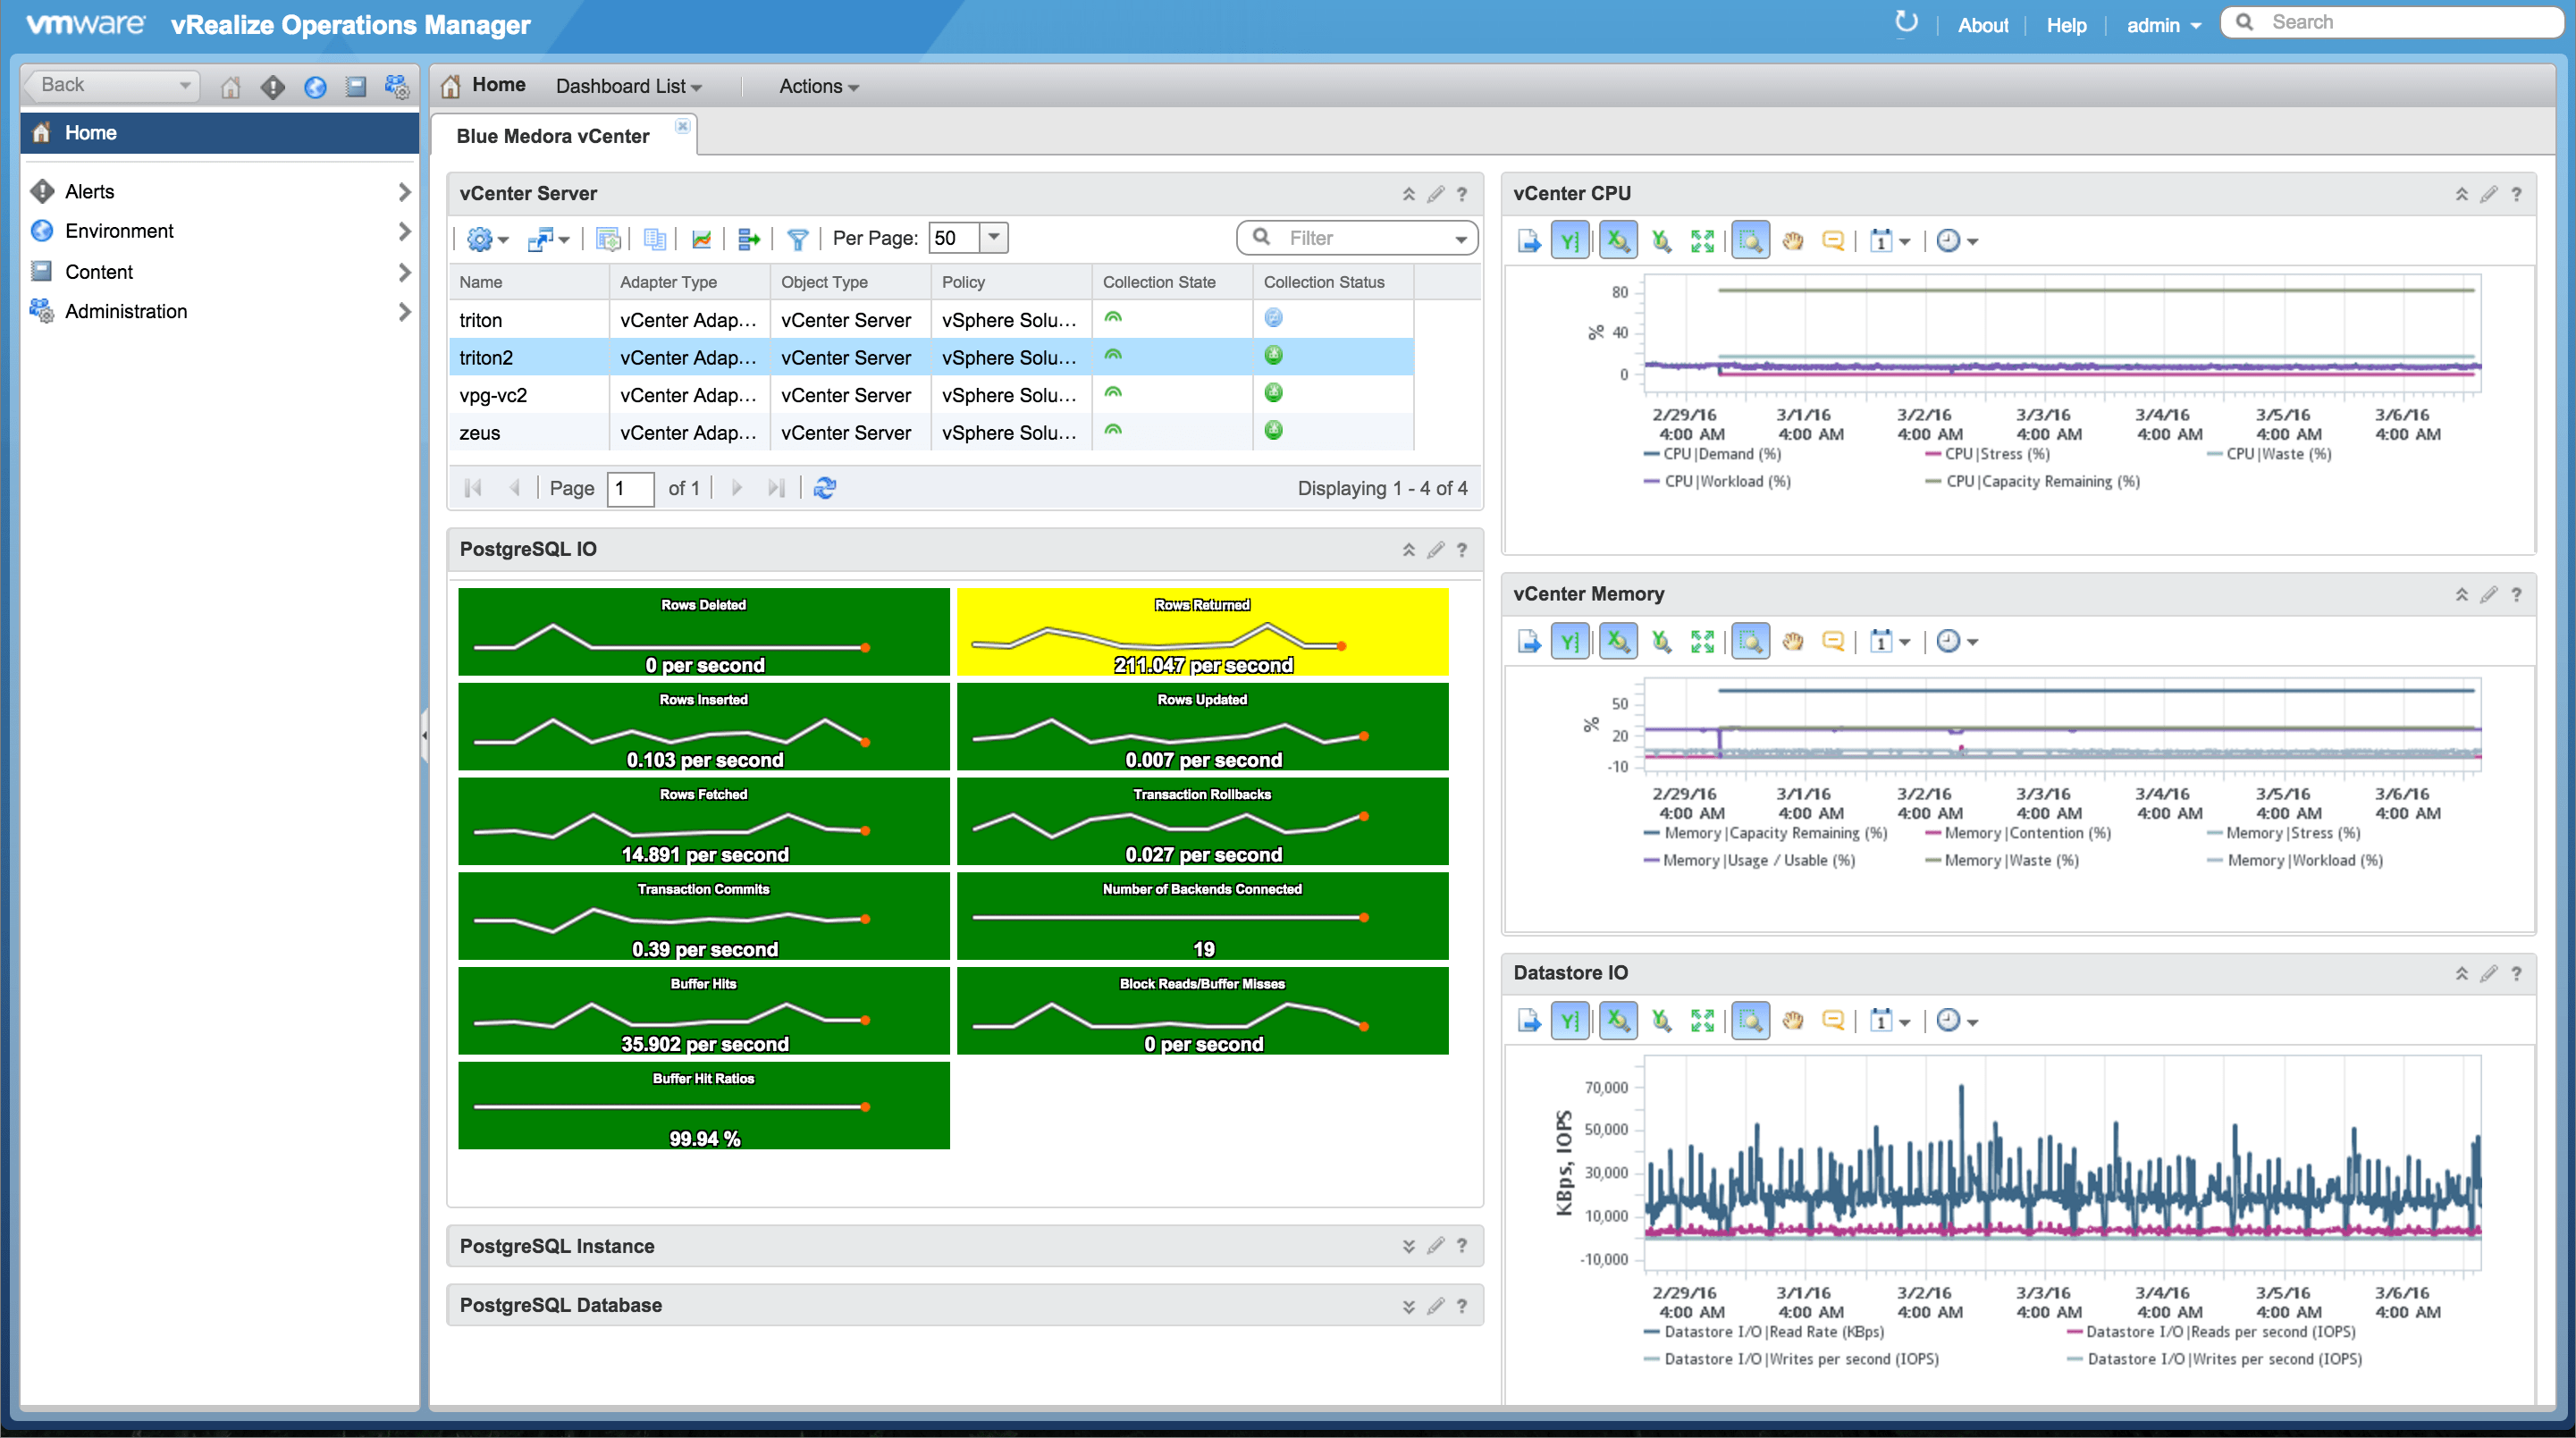 Image depicts Network Performance Management example with VMware's vRealize Operations Manager dashboard.